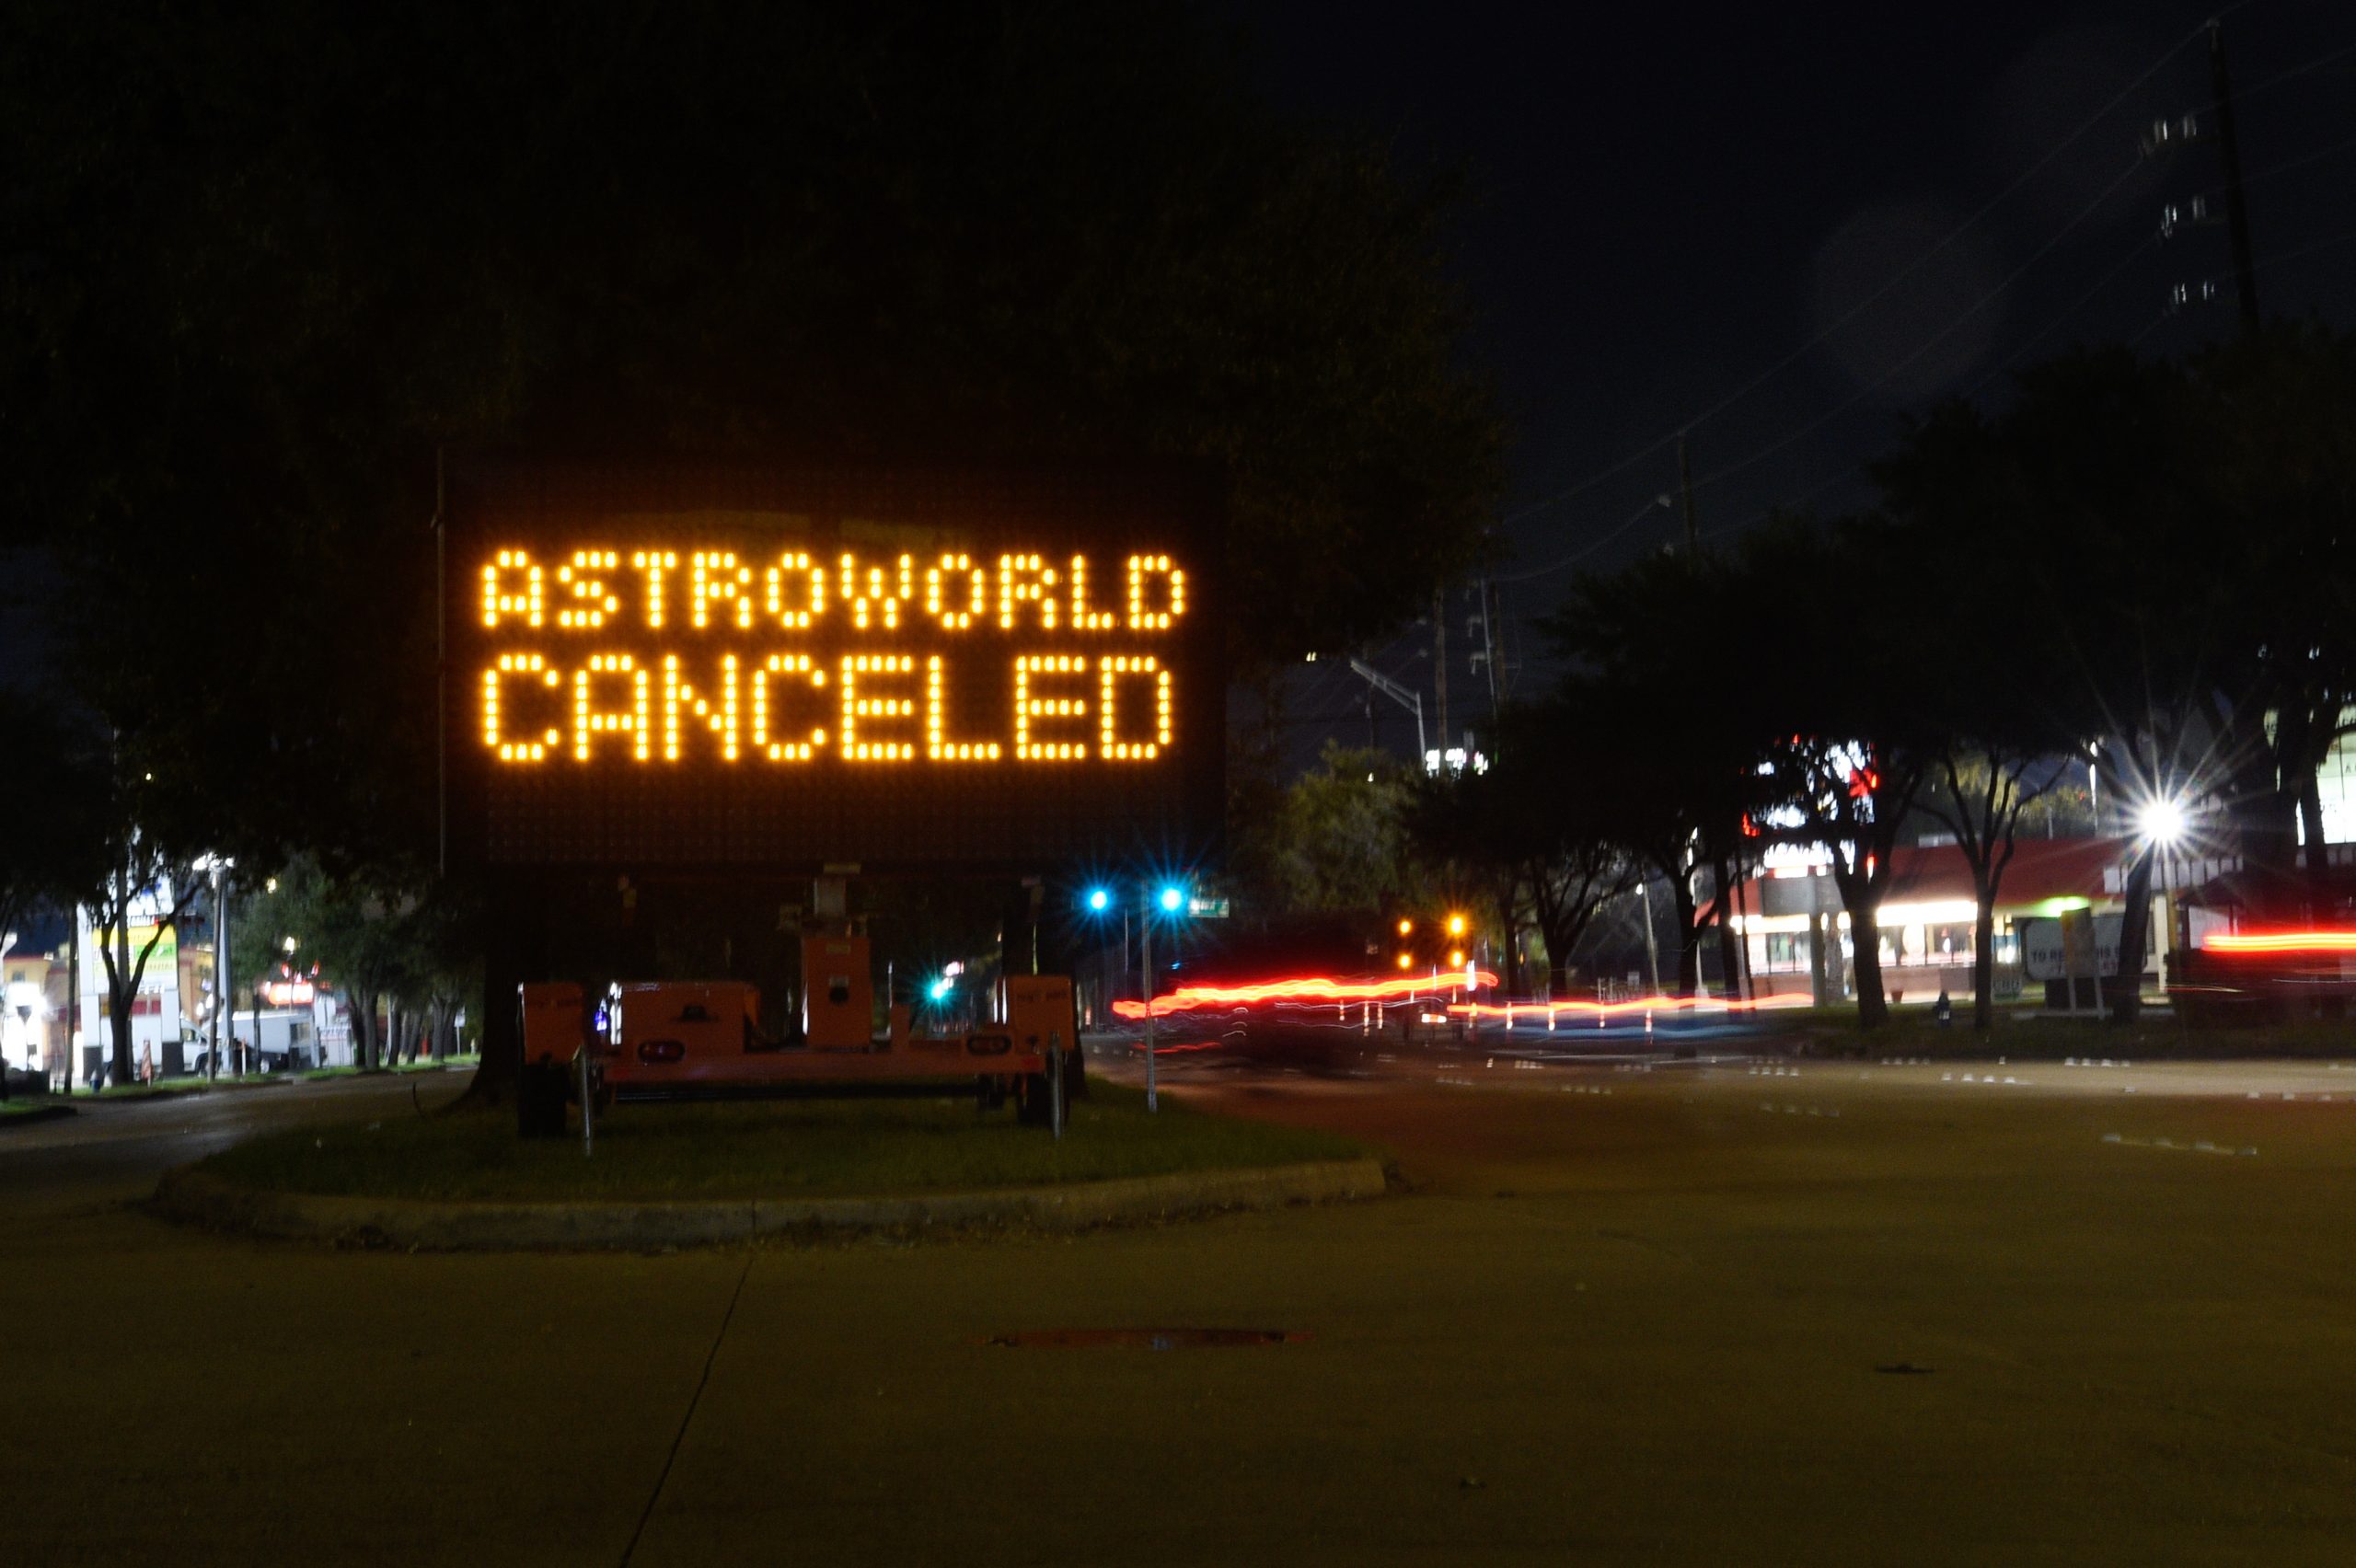 epa09567532 A view on the Astroworld music festival venue after all further events are canceled following a concert where eight people were killed and several others injured at a concert at the Astroworld Music Festival in Houston, Texas, USA, 06 November 2021. According to reports eight people have died and many others are injured after a crowd surge towards the stage where US rapper Travis Scott was performing 05 November. 17 people were transported to hospitals and others were being treated at a field hospital nearby.  EPA/KEN MURRAY